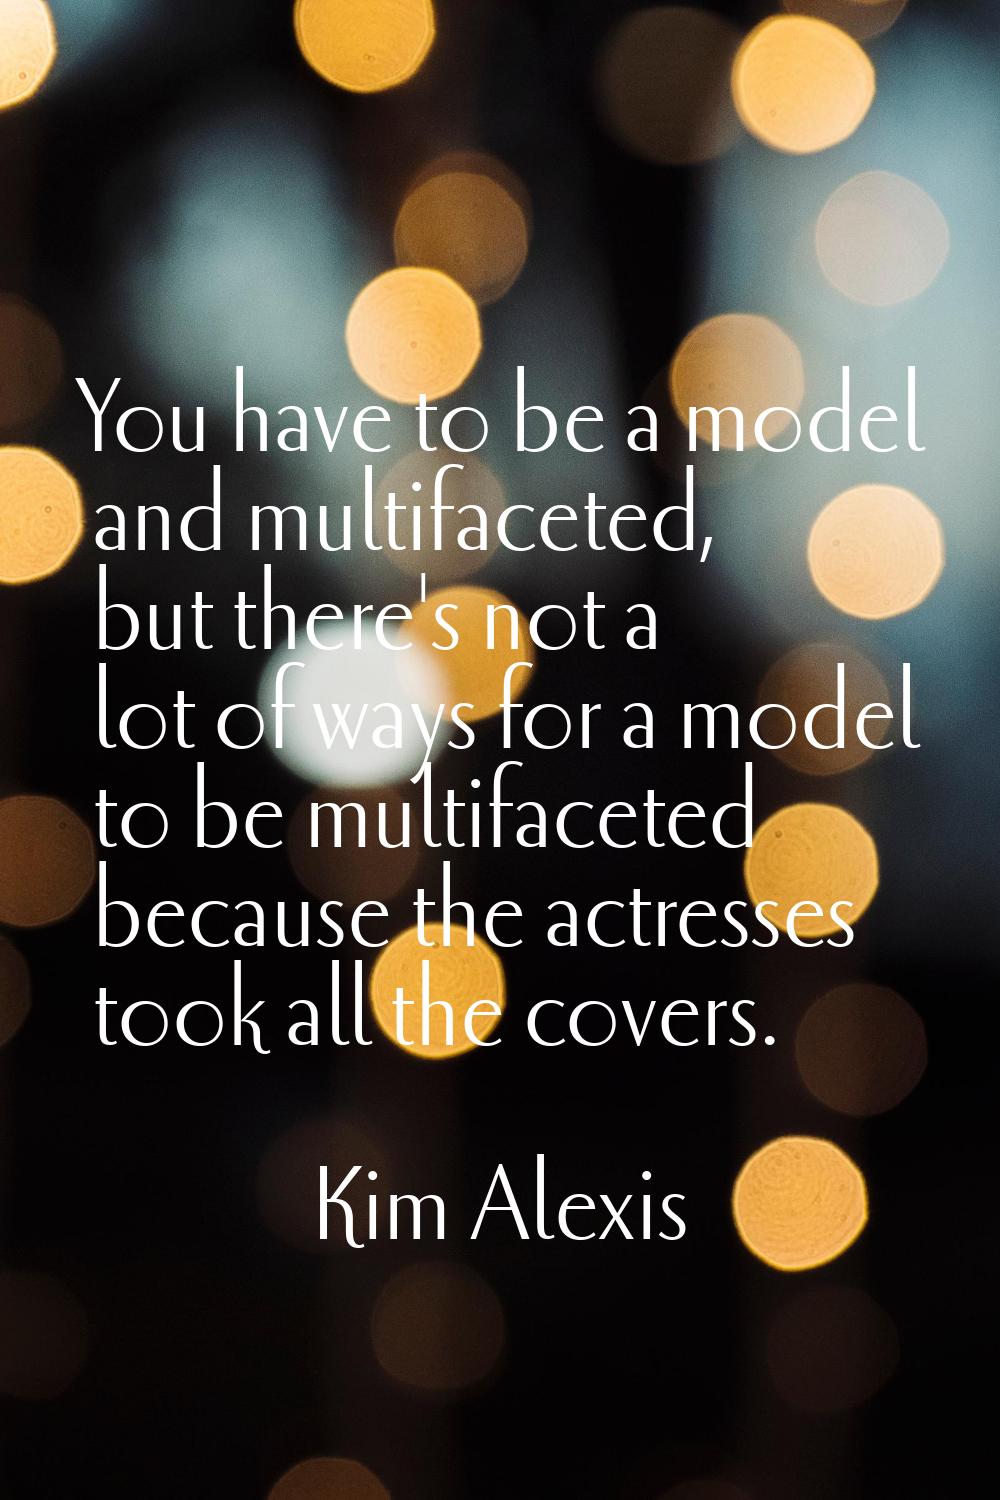 You have to be a model and multifaceted, but there's not a lot of ways for a model to be multifacet